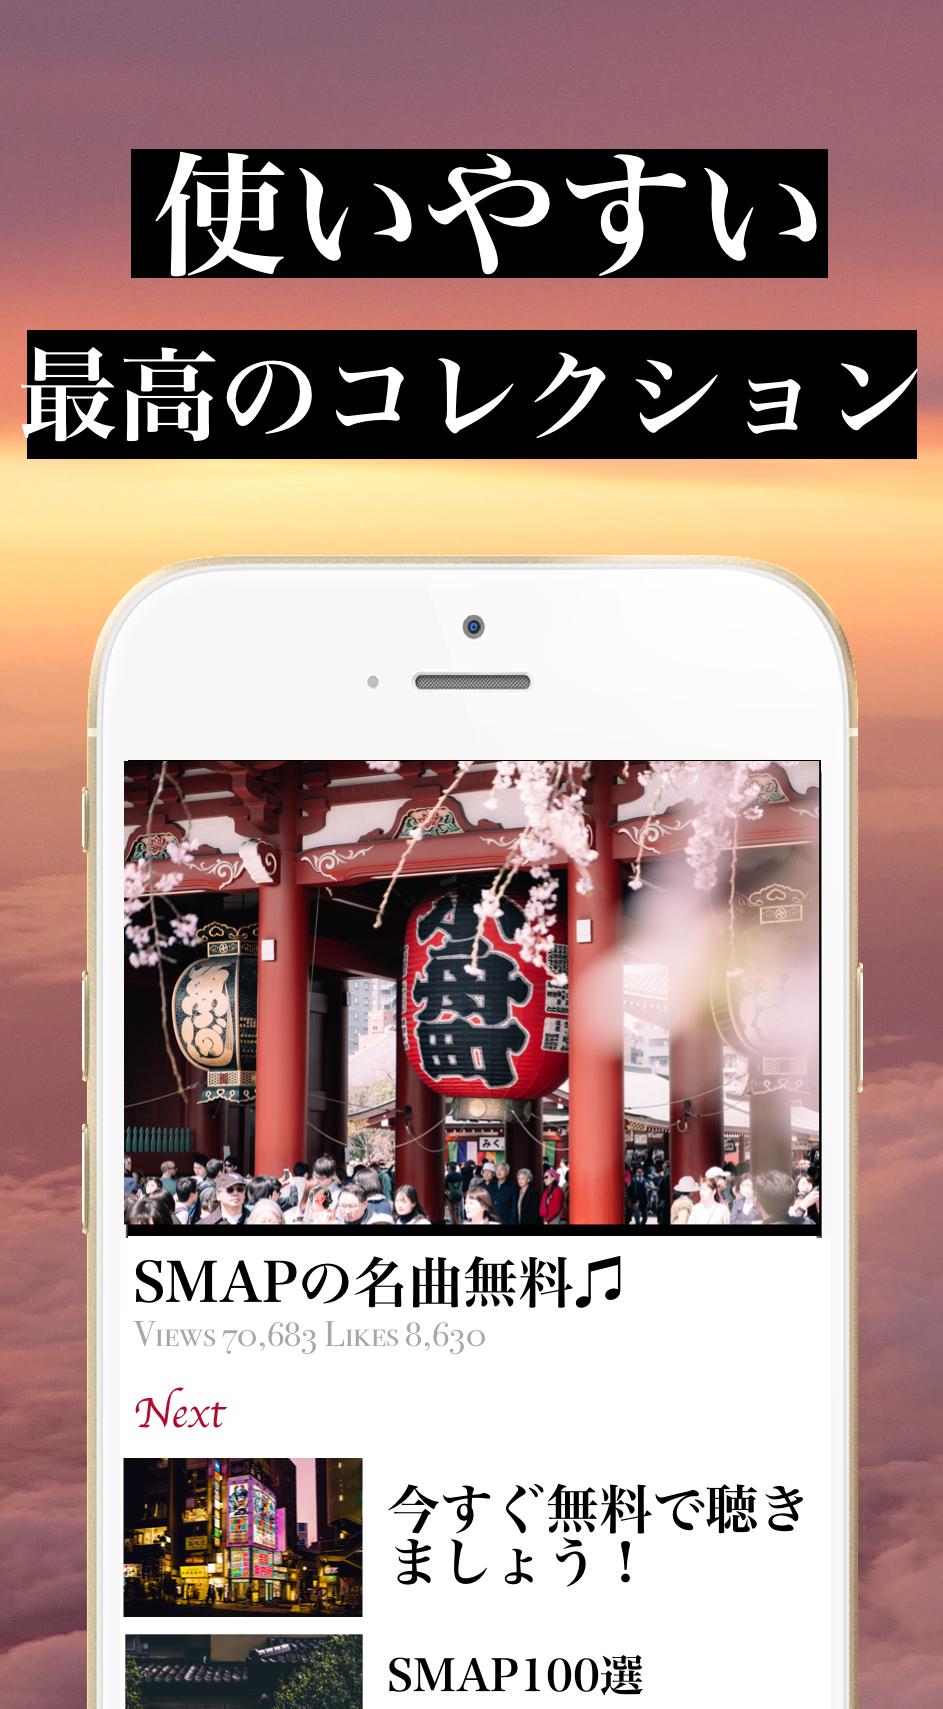 Smapの名曲ベスト ポップ Jpop 全部無料 For Android Apk Download